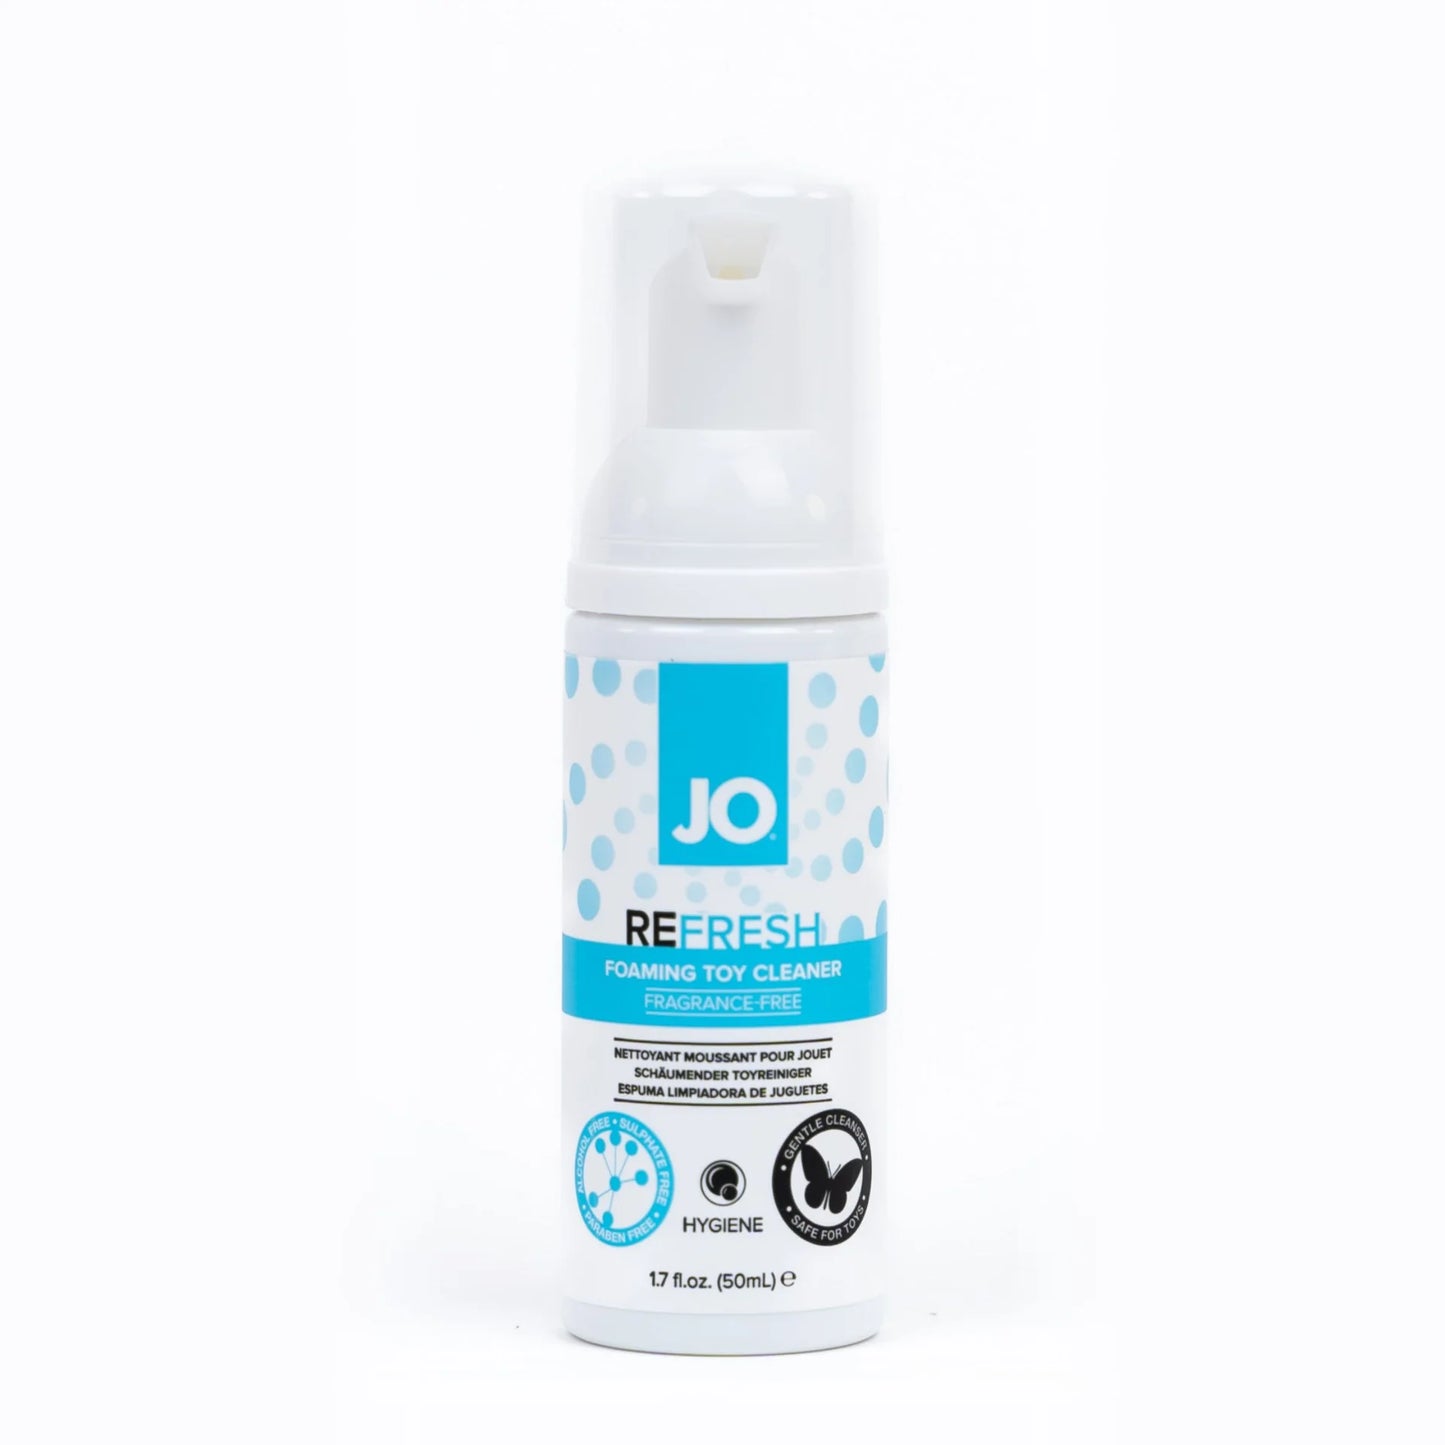 JO Fragrance Free Refresh Foaming Toy Cleaner